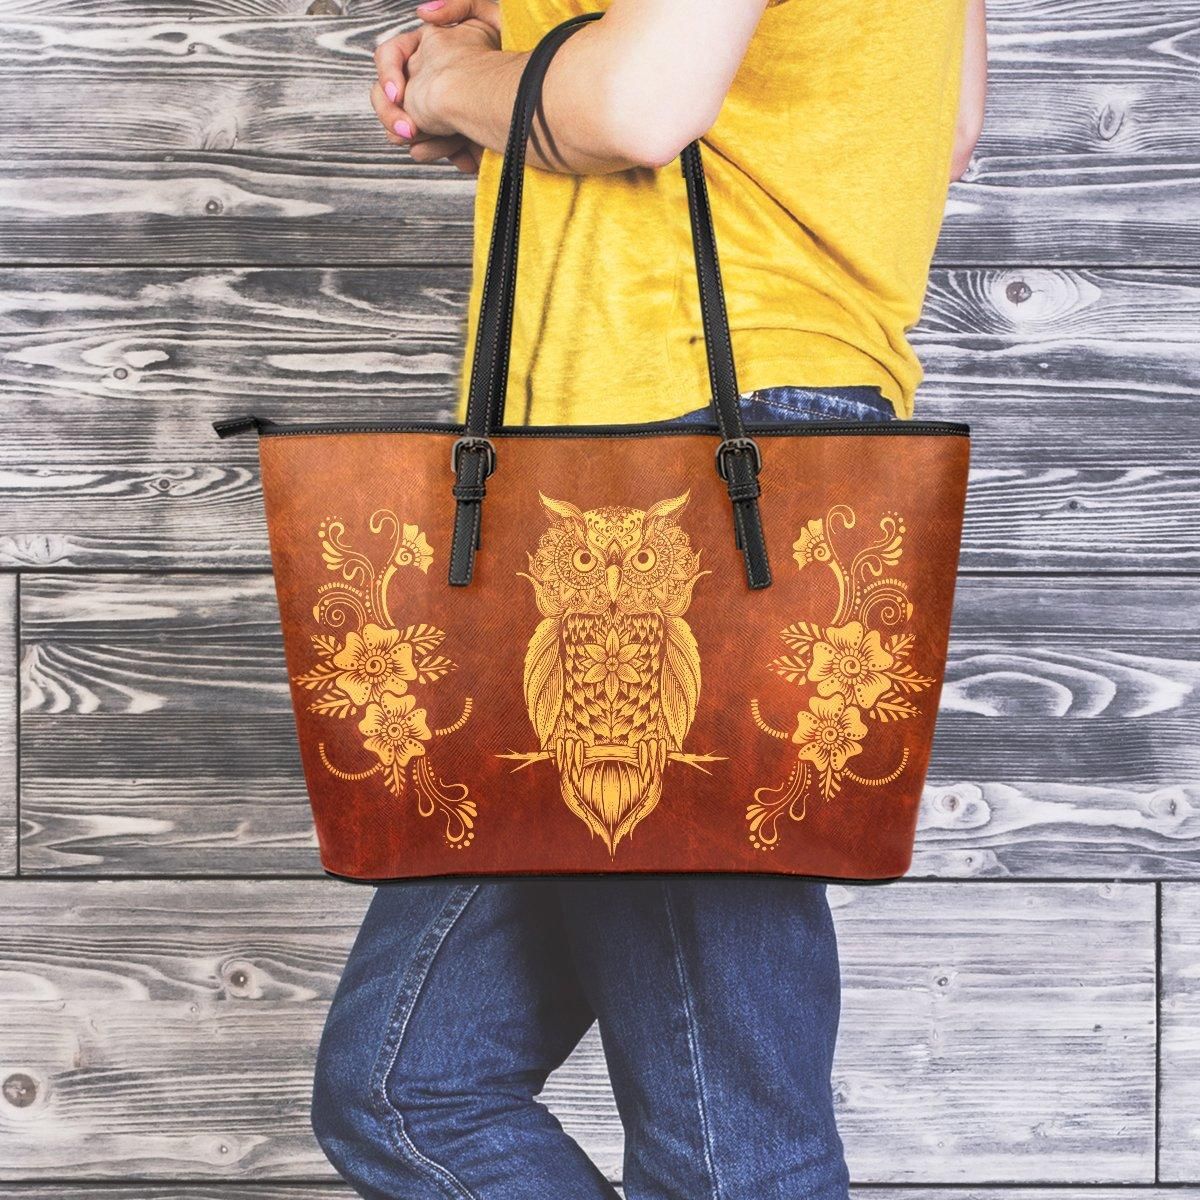 OWL LARGE LEATHER TOTE BAG